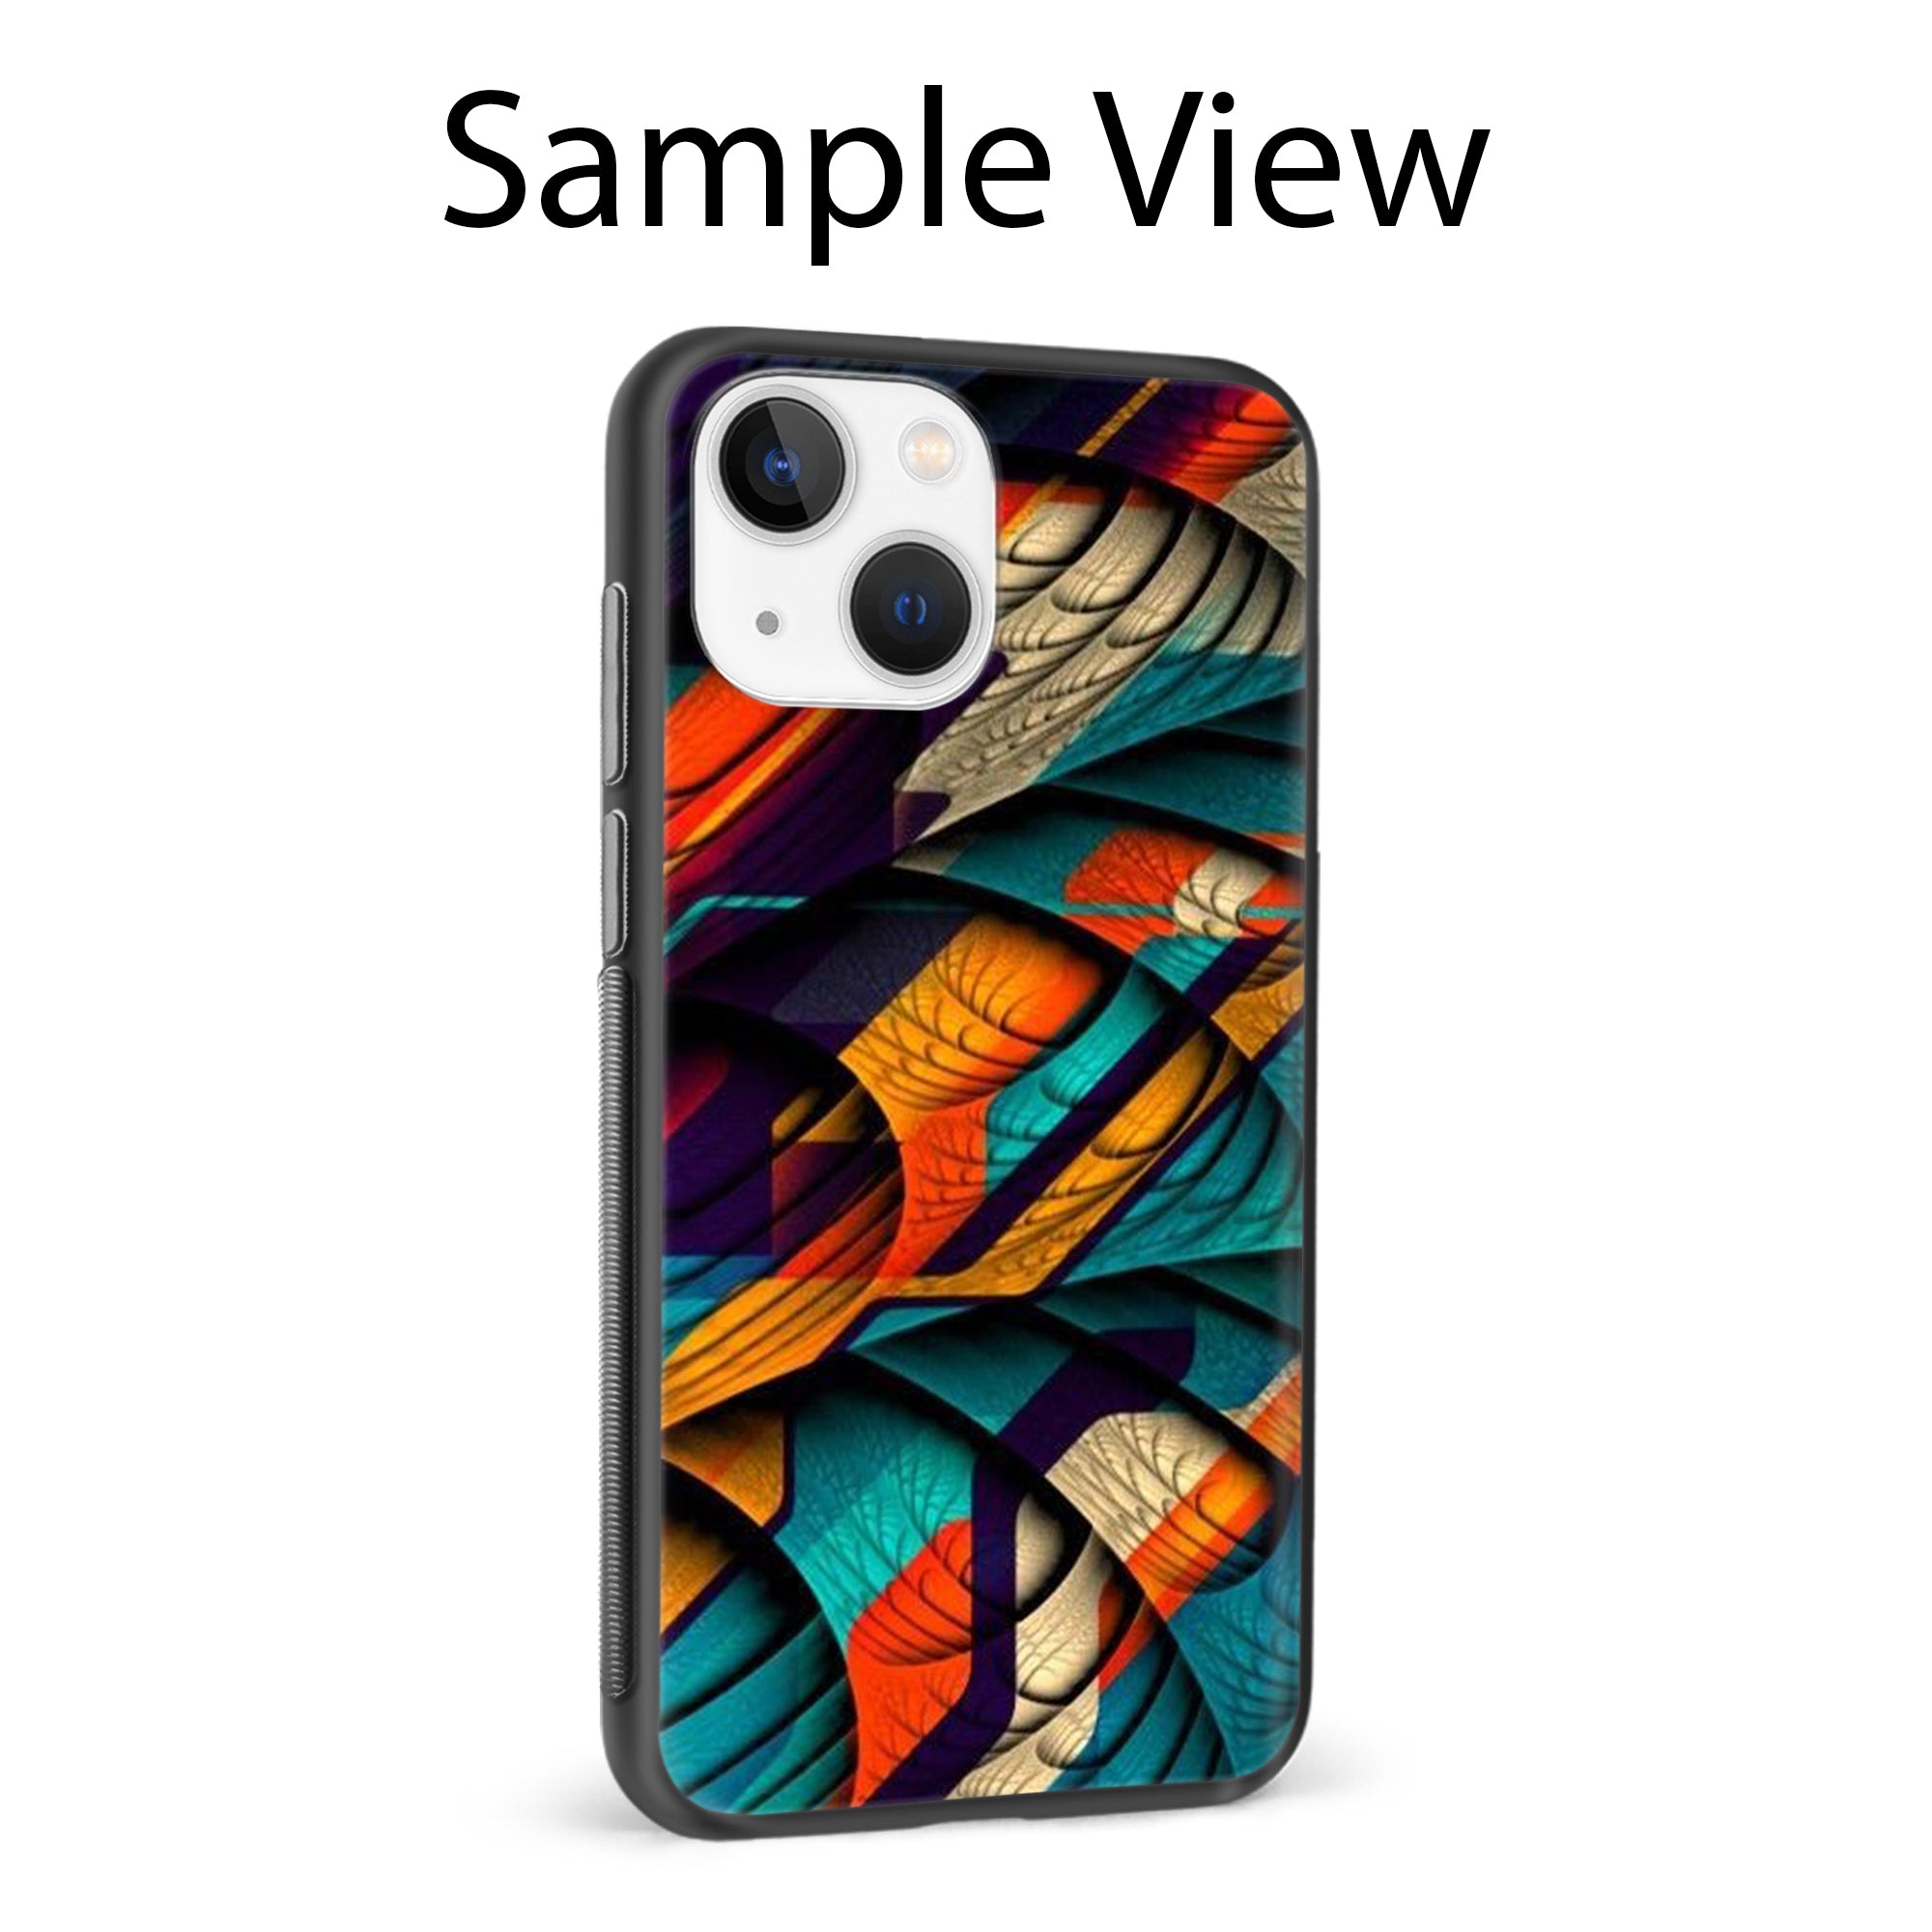 Buy Colour Abstract Metal-Silicon Back Mobile Phone Case/Cover For Samsung Galaxy F42 5G Online